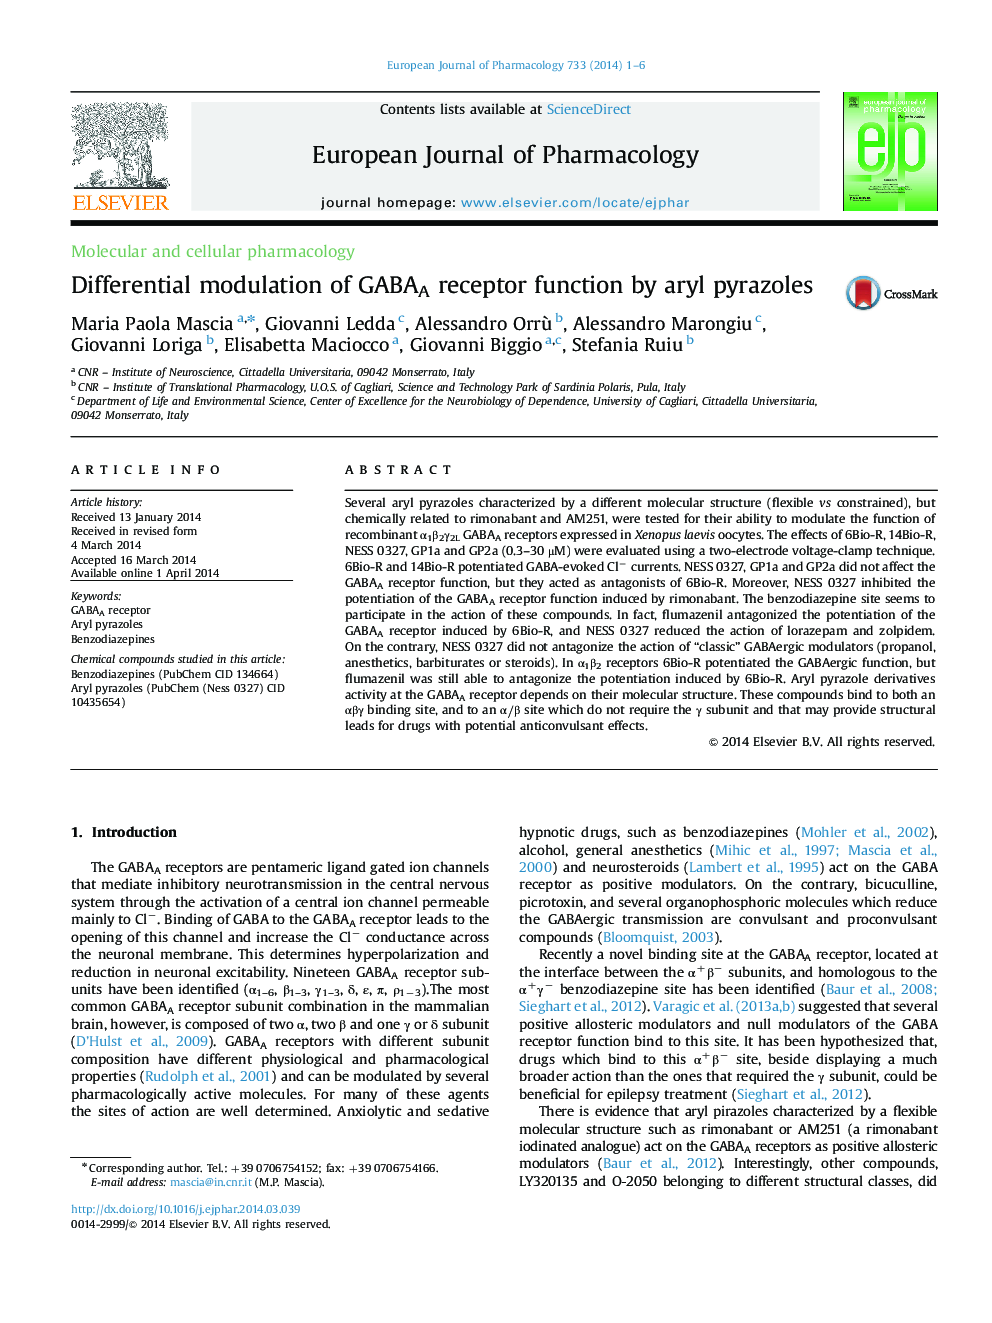 Differential modulation of GABAA receptor function by aryl pyrazoles